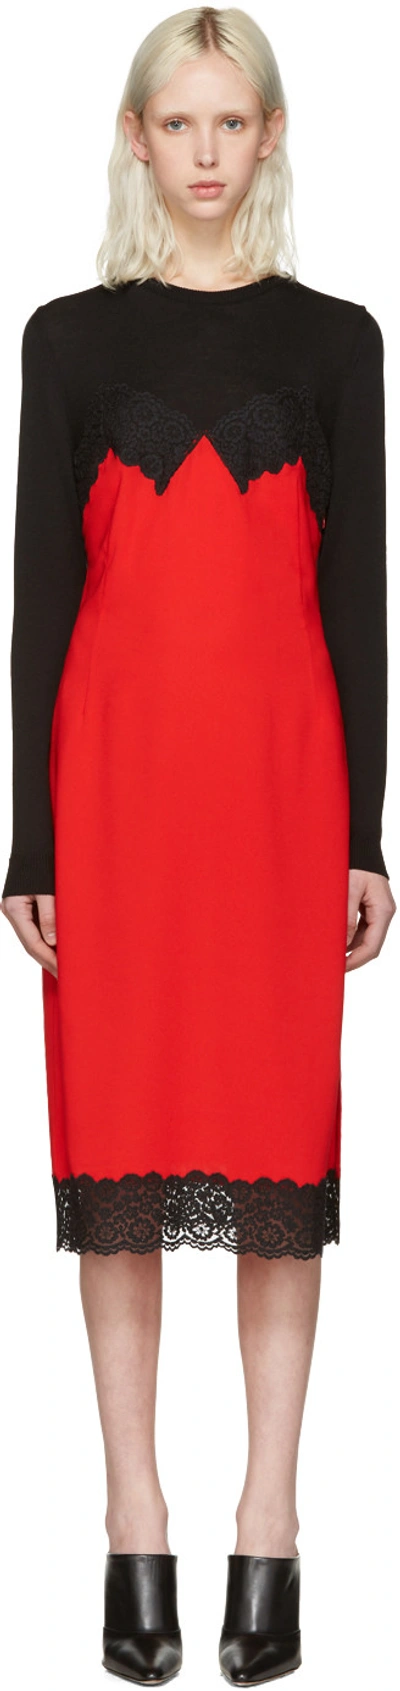 Altuzarra Woman Debbie Lace-trimmed Two-tone Merino Wool And Crepe Dress Red In Medium Red